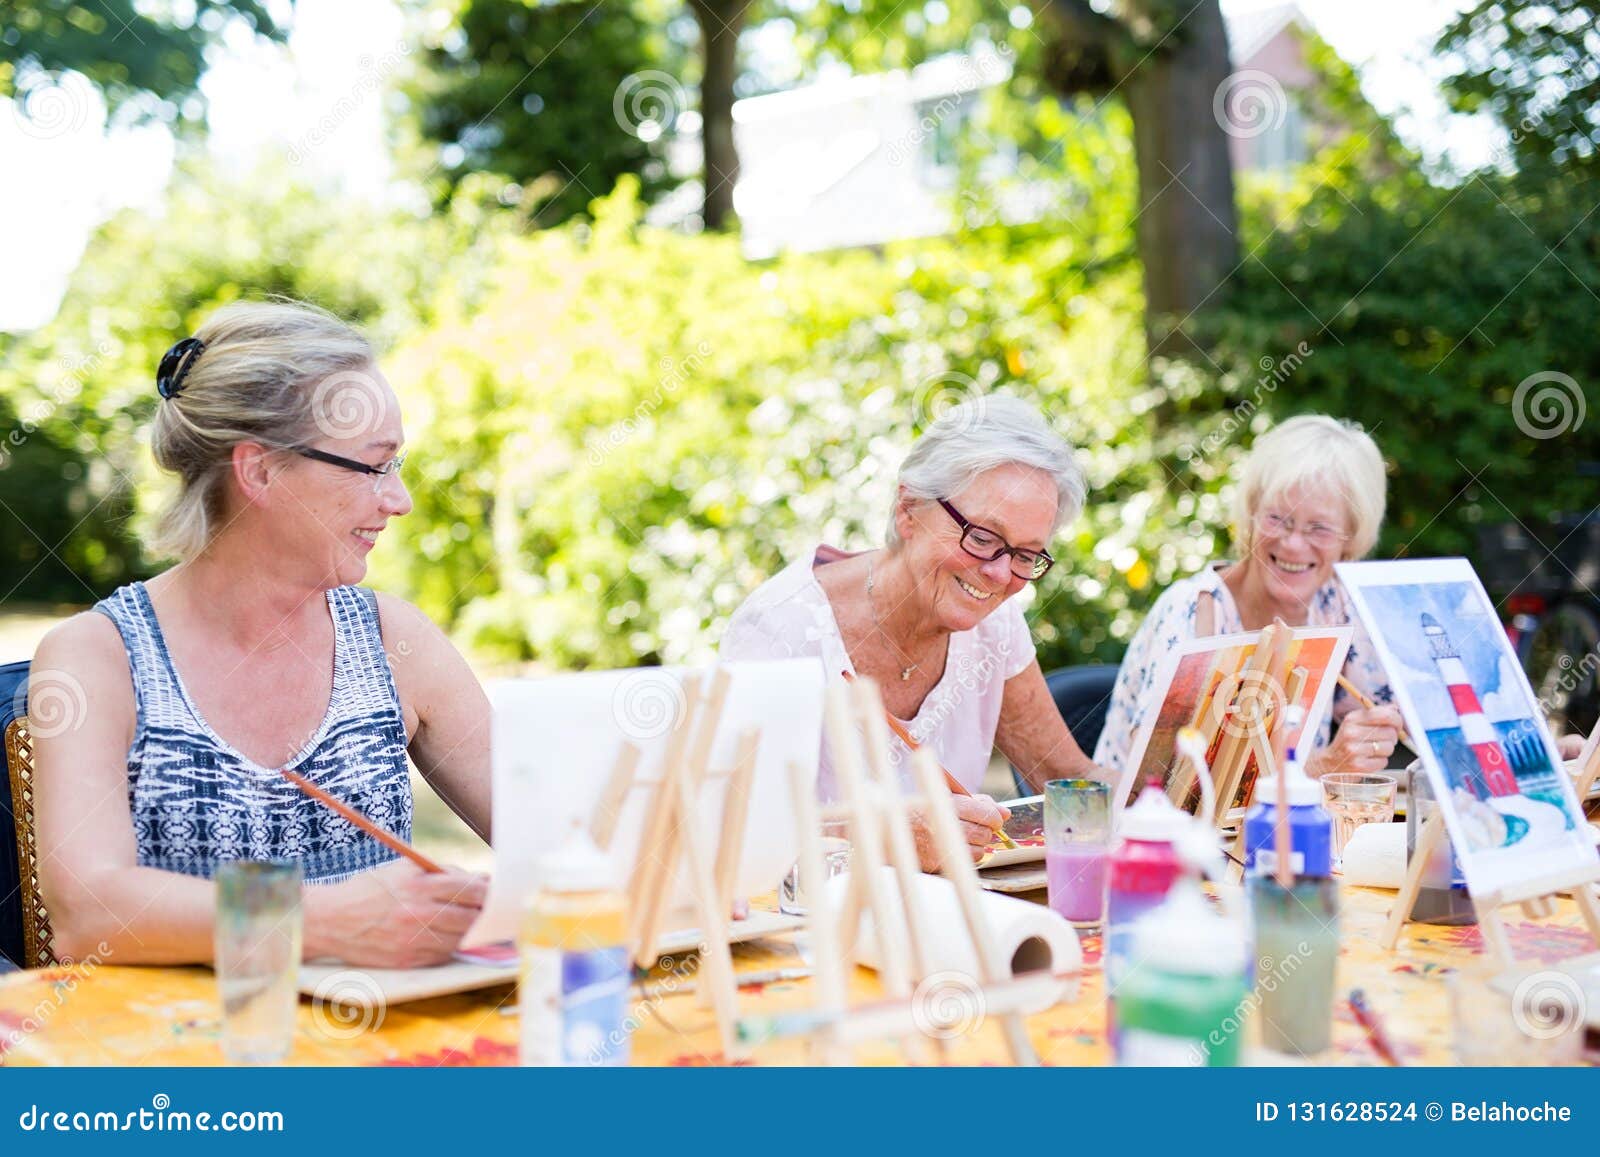 group of happy elderly women attending an outdoor art class in a garden or park painting from sample pictures on easels while